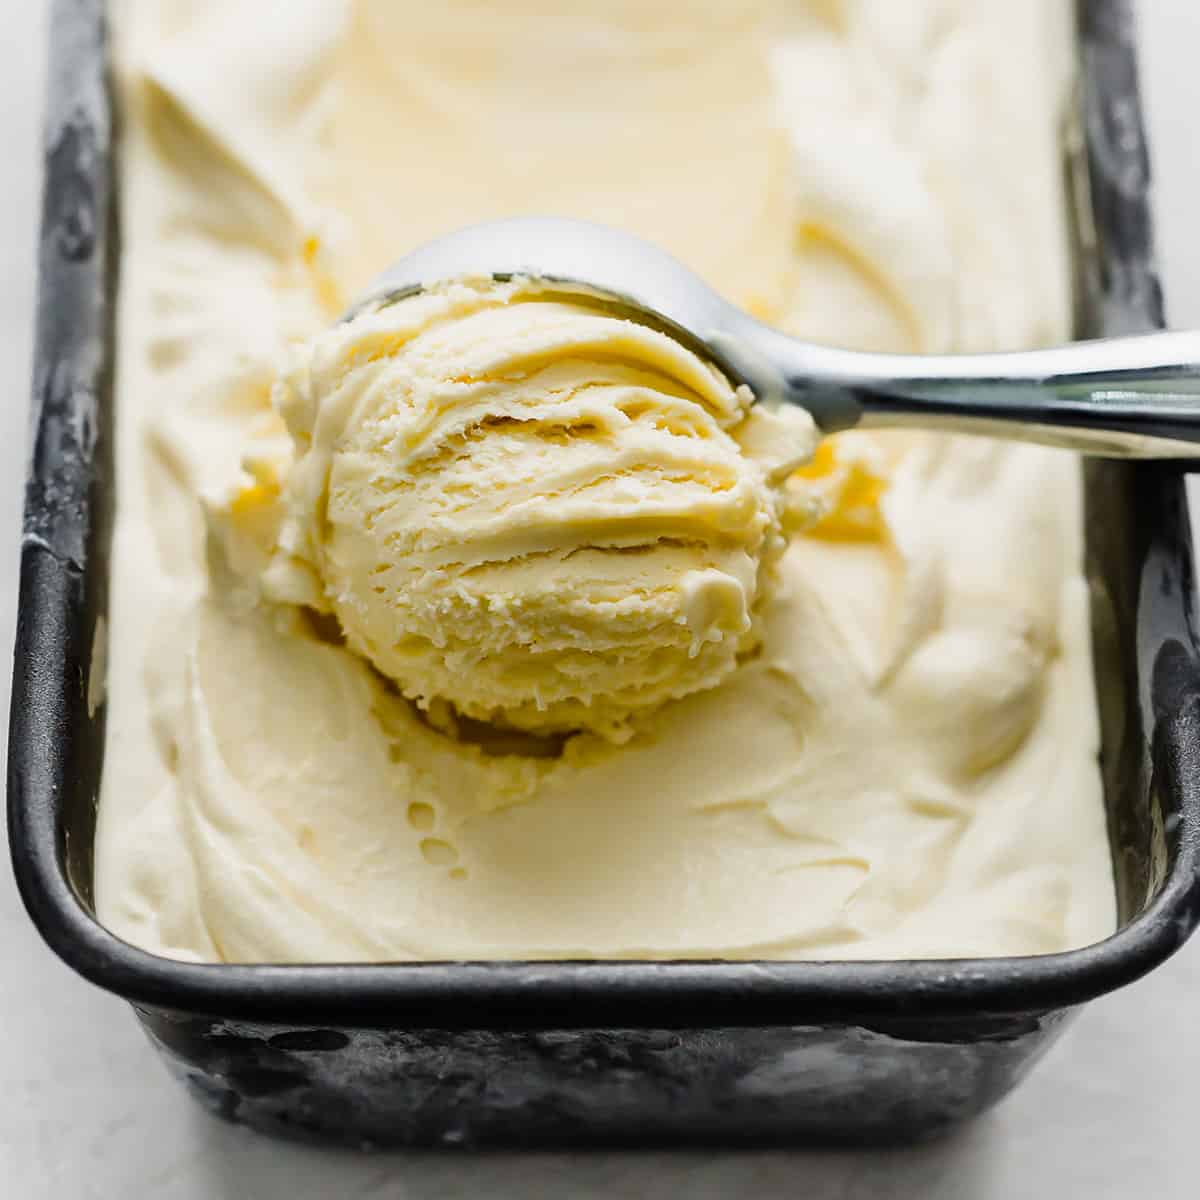 How To Make Vanilla Ice Cream With Egg In An Ice Cream Maker